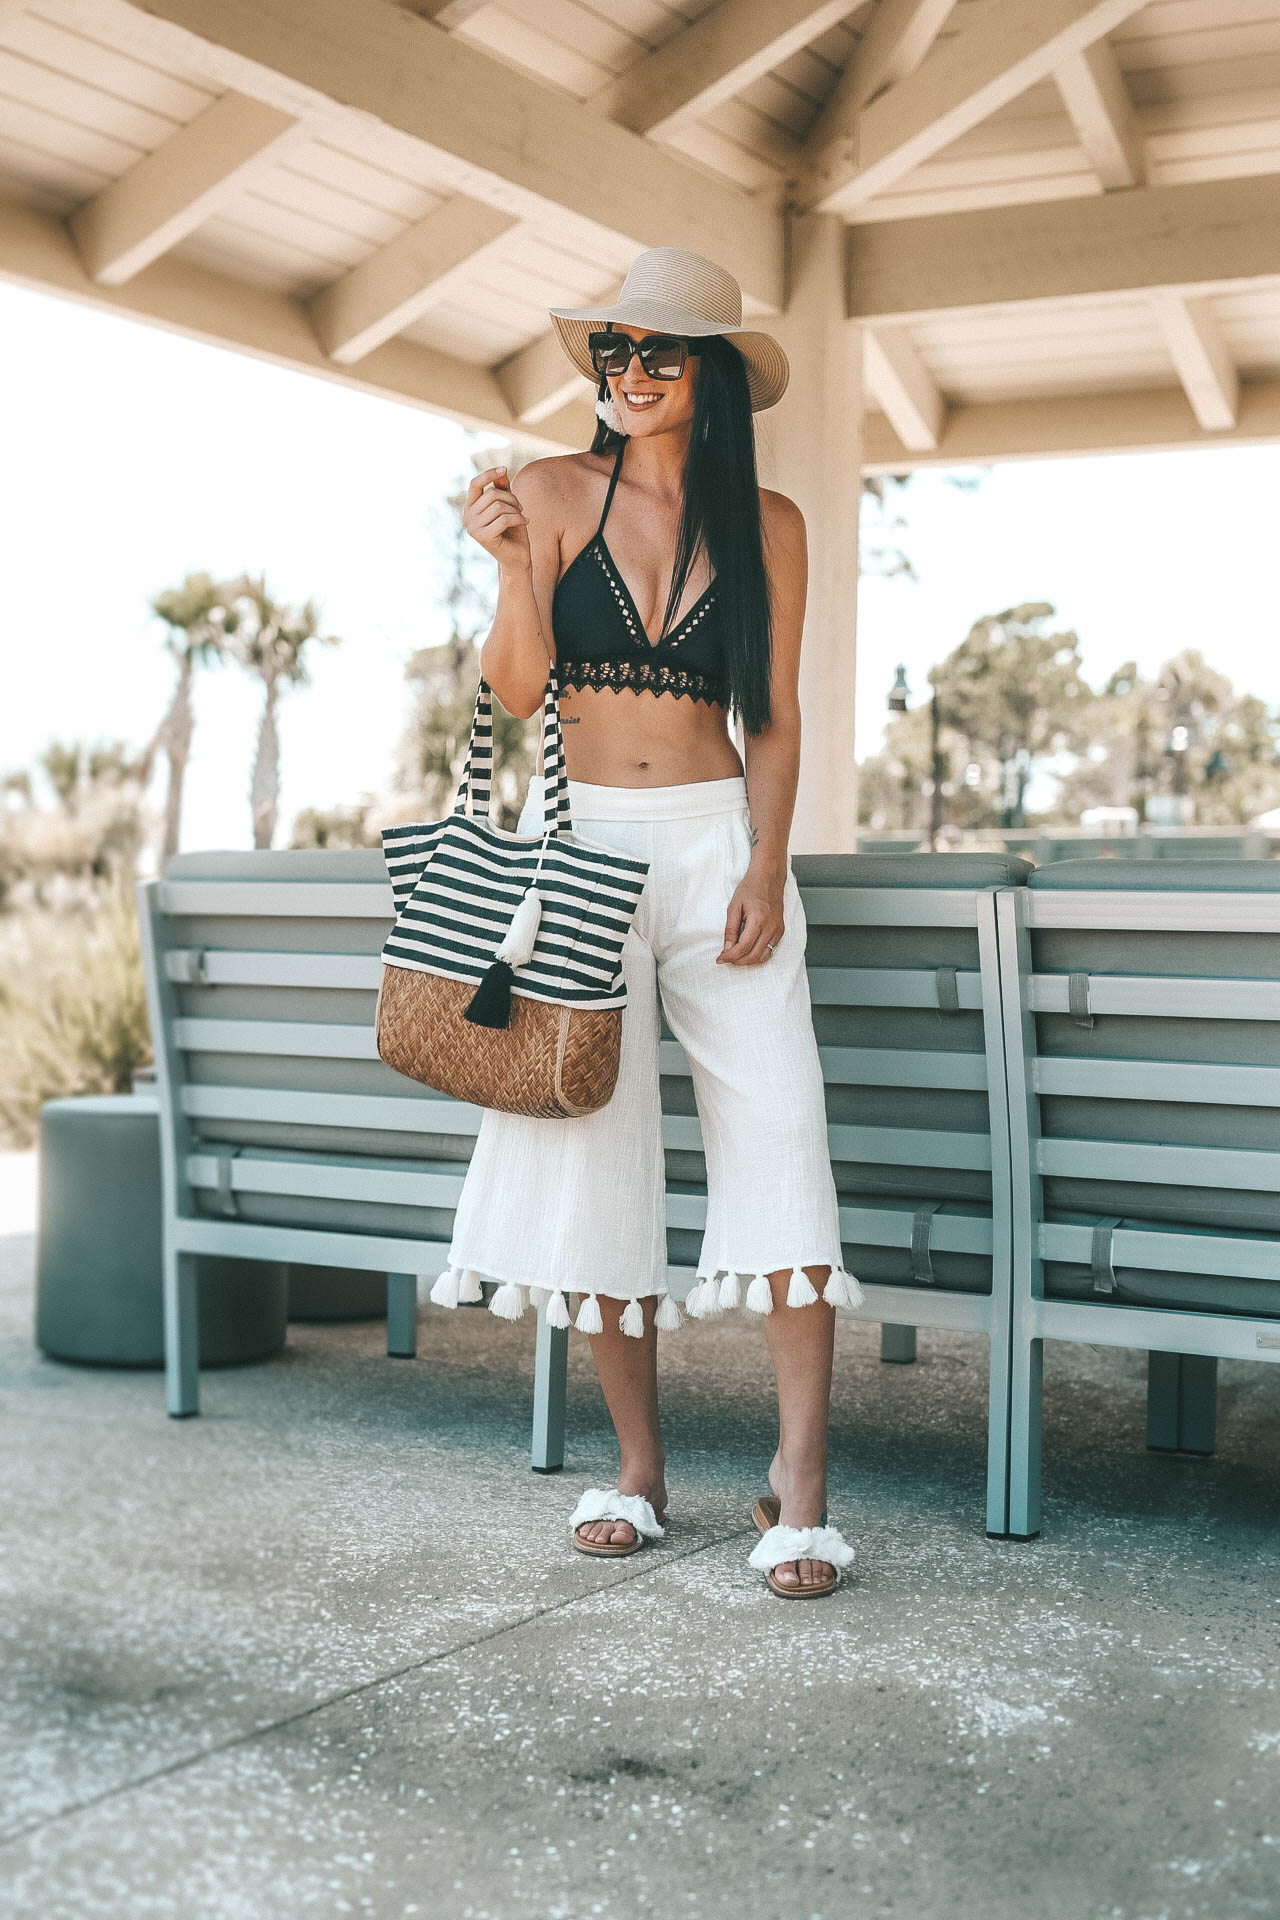 how to look cute yet comfortable for a beach vacation. | Resort Wear for Fall | What to wear to the beach | Black lace bikini | Target Bikini || Dressed to Kill #fashion #style #womensoutfit #womensfashion #bikini #resortwear #summerstyle #beachoutfit #fallfashion #dtkaustin | Beach Fashion: How to Look Put Together featured by popular Austin fashion blogger Dressed to Kill